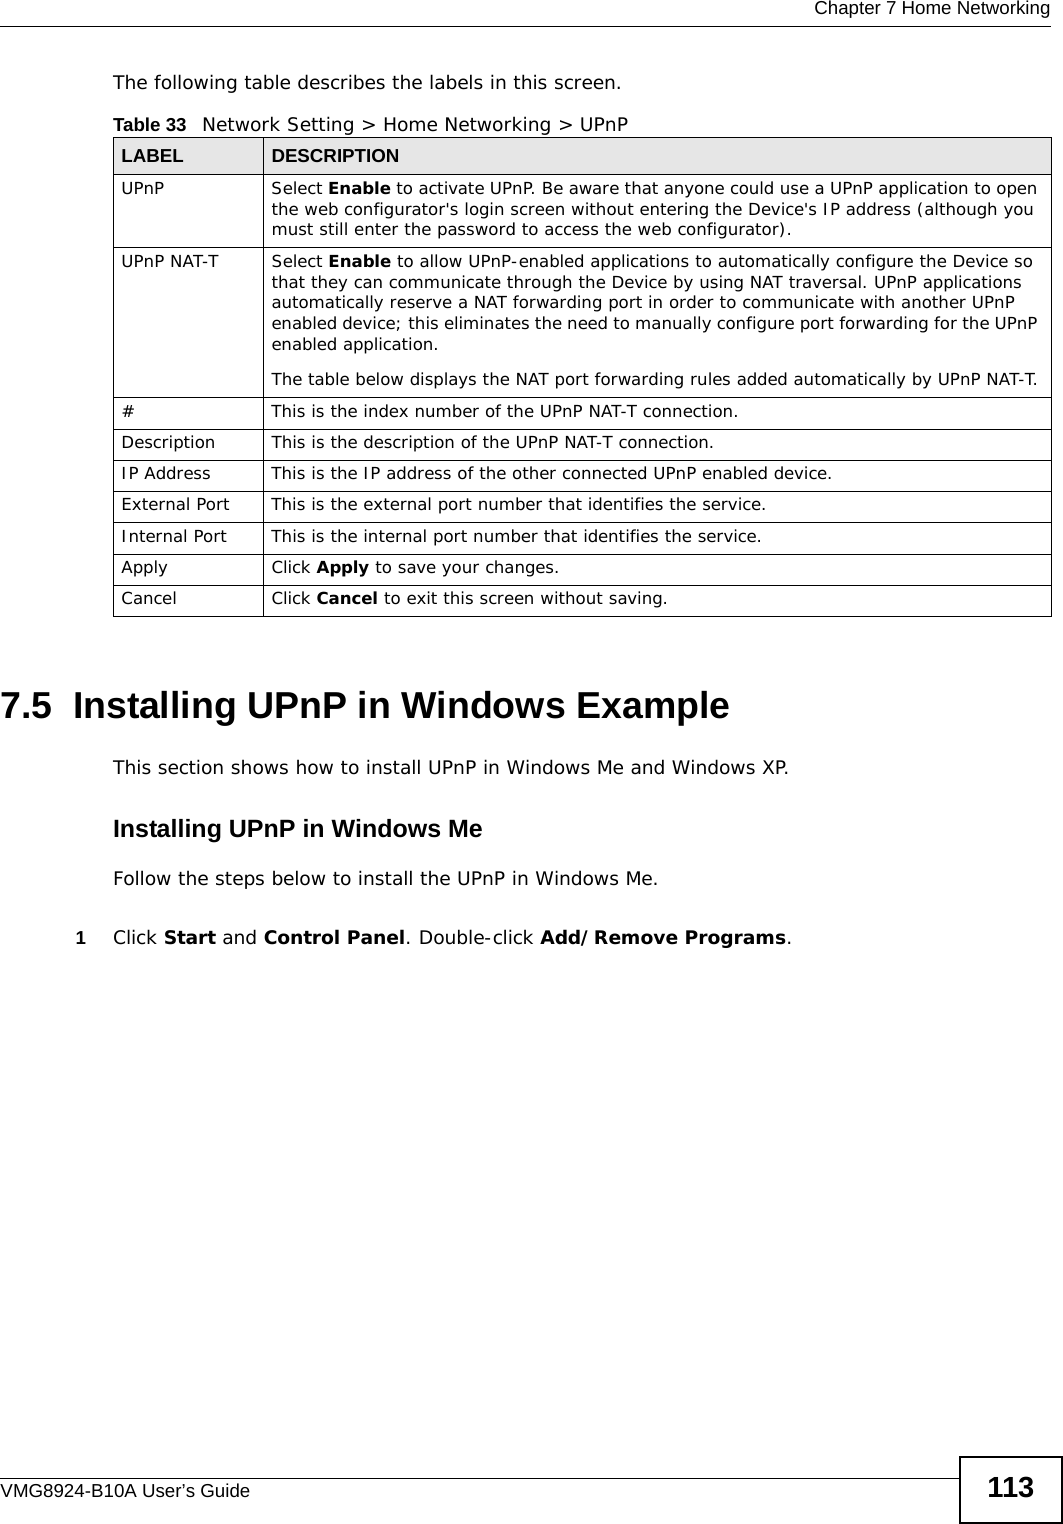  Chapter 7 Home NetworkingVMG8924-B10A User’s Guide 113The following table describes the labels in this screen.7.5  Installing UPnP in Windows ExampleThis section shows how to install UPnP in Windows Me and Windows XP. Installing UPnP in Windows MeFollow the steps below to install the UPnP in Windows Me. 1Click Start and Control Panel. Double-click Add/Remove Programs.Table 33   Network Setting &gt; Home Networking &gt; UPnPLABEL DESCRIPTIONUPnP Select Enable to activate UPnP. Be aware that anyone could use a UPnP application to open the web configurator&apos;s login screen without entering the Device&apos;s IP address (although you must still enter the password to access the web configurator).UPnP NAT-T Select Enable to allow UPnP-enabled applications to automatically configure the Device so that they can communicate through the Device by using NAT traversal. UPnP applications automatically reserve a NAT forwarding port in order to communicate with another UPnP enabled device; this eliminates the need to manually configure port forwarding for the UPnP enabled application. The table below displays the NAT port forwarding rules added automatically by UPnP NAT-T.# This is the index number of the UPnP NAT-T connection.Description This is the description of the UPnP NAT-T connection.IP Address This is the IP address of the other connected UPnP enabled device.External Port This is the external port number that identifies the service.Internal Port This is the internal port number that identifies the service.Apply Click Apply to save your changes.Cancel Click Cancel to exit this screen without saving.